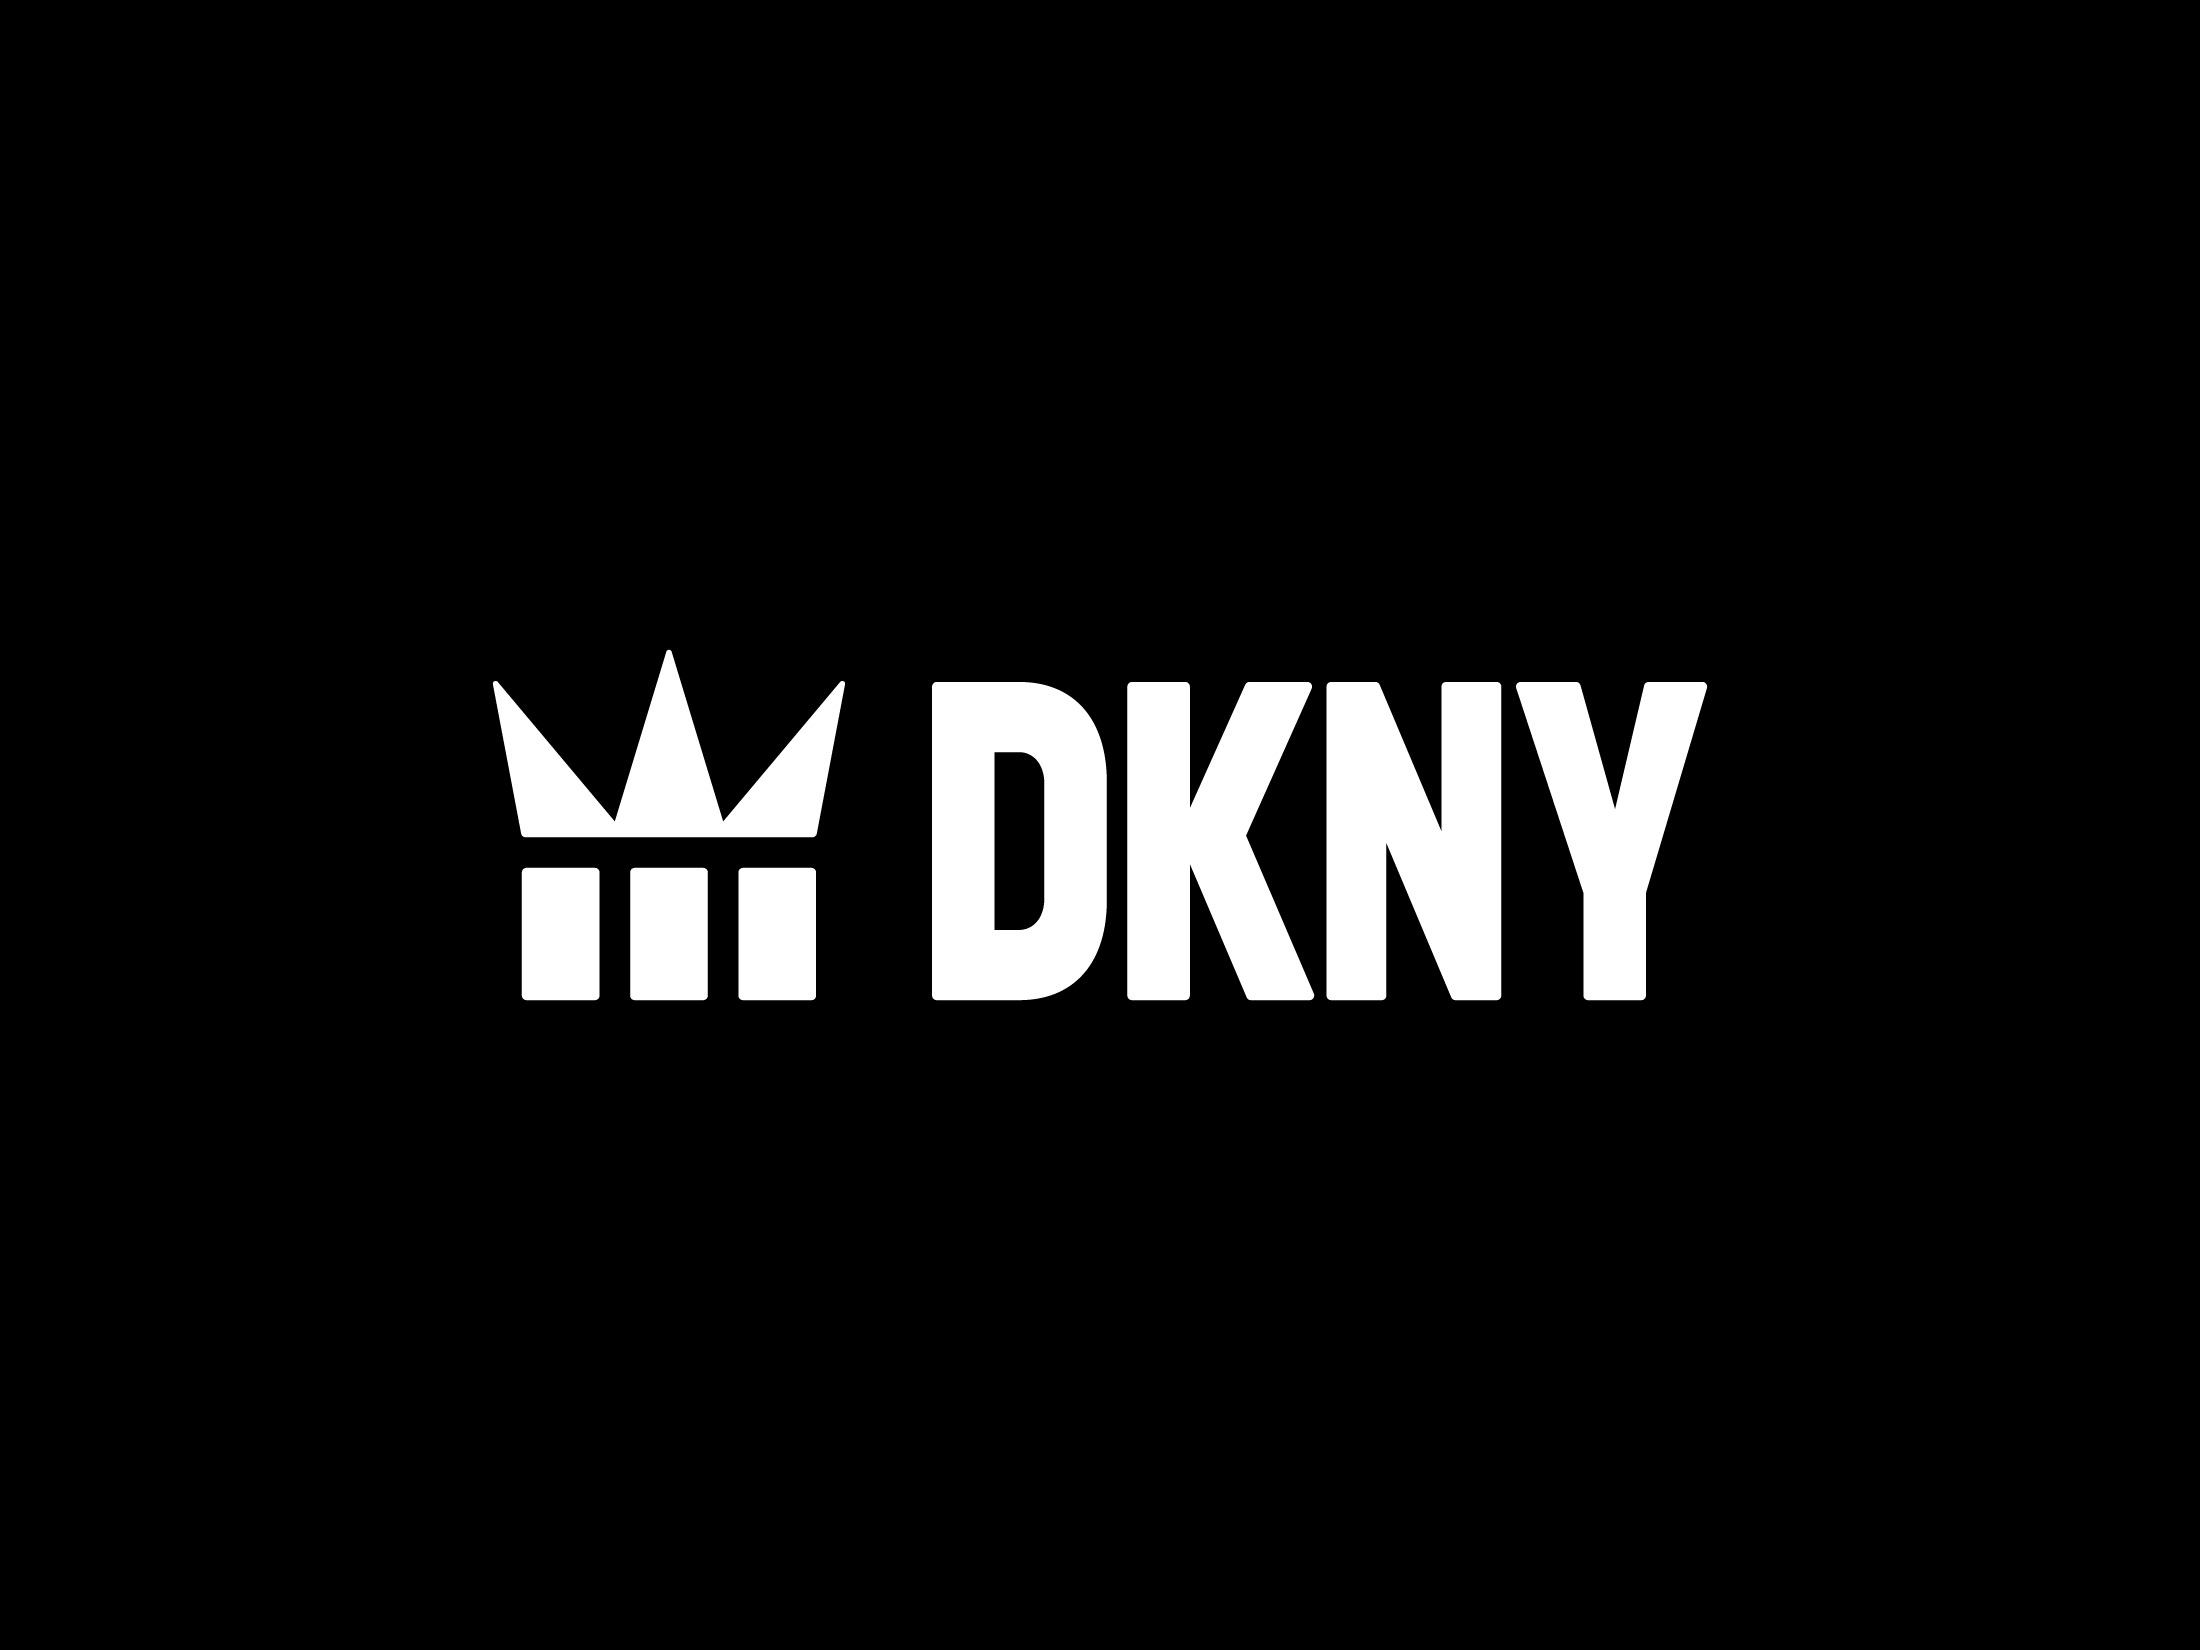 100+] Dkny Wallpapers | Wallpapers.com